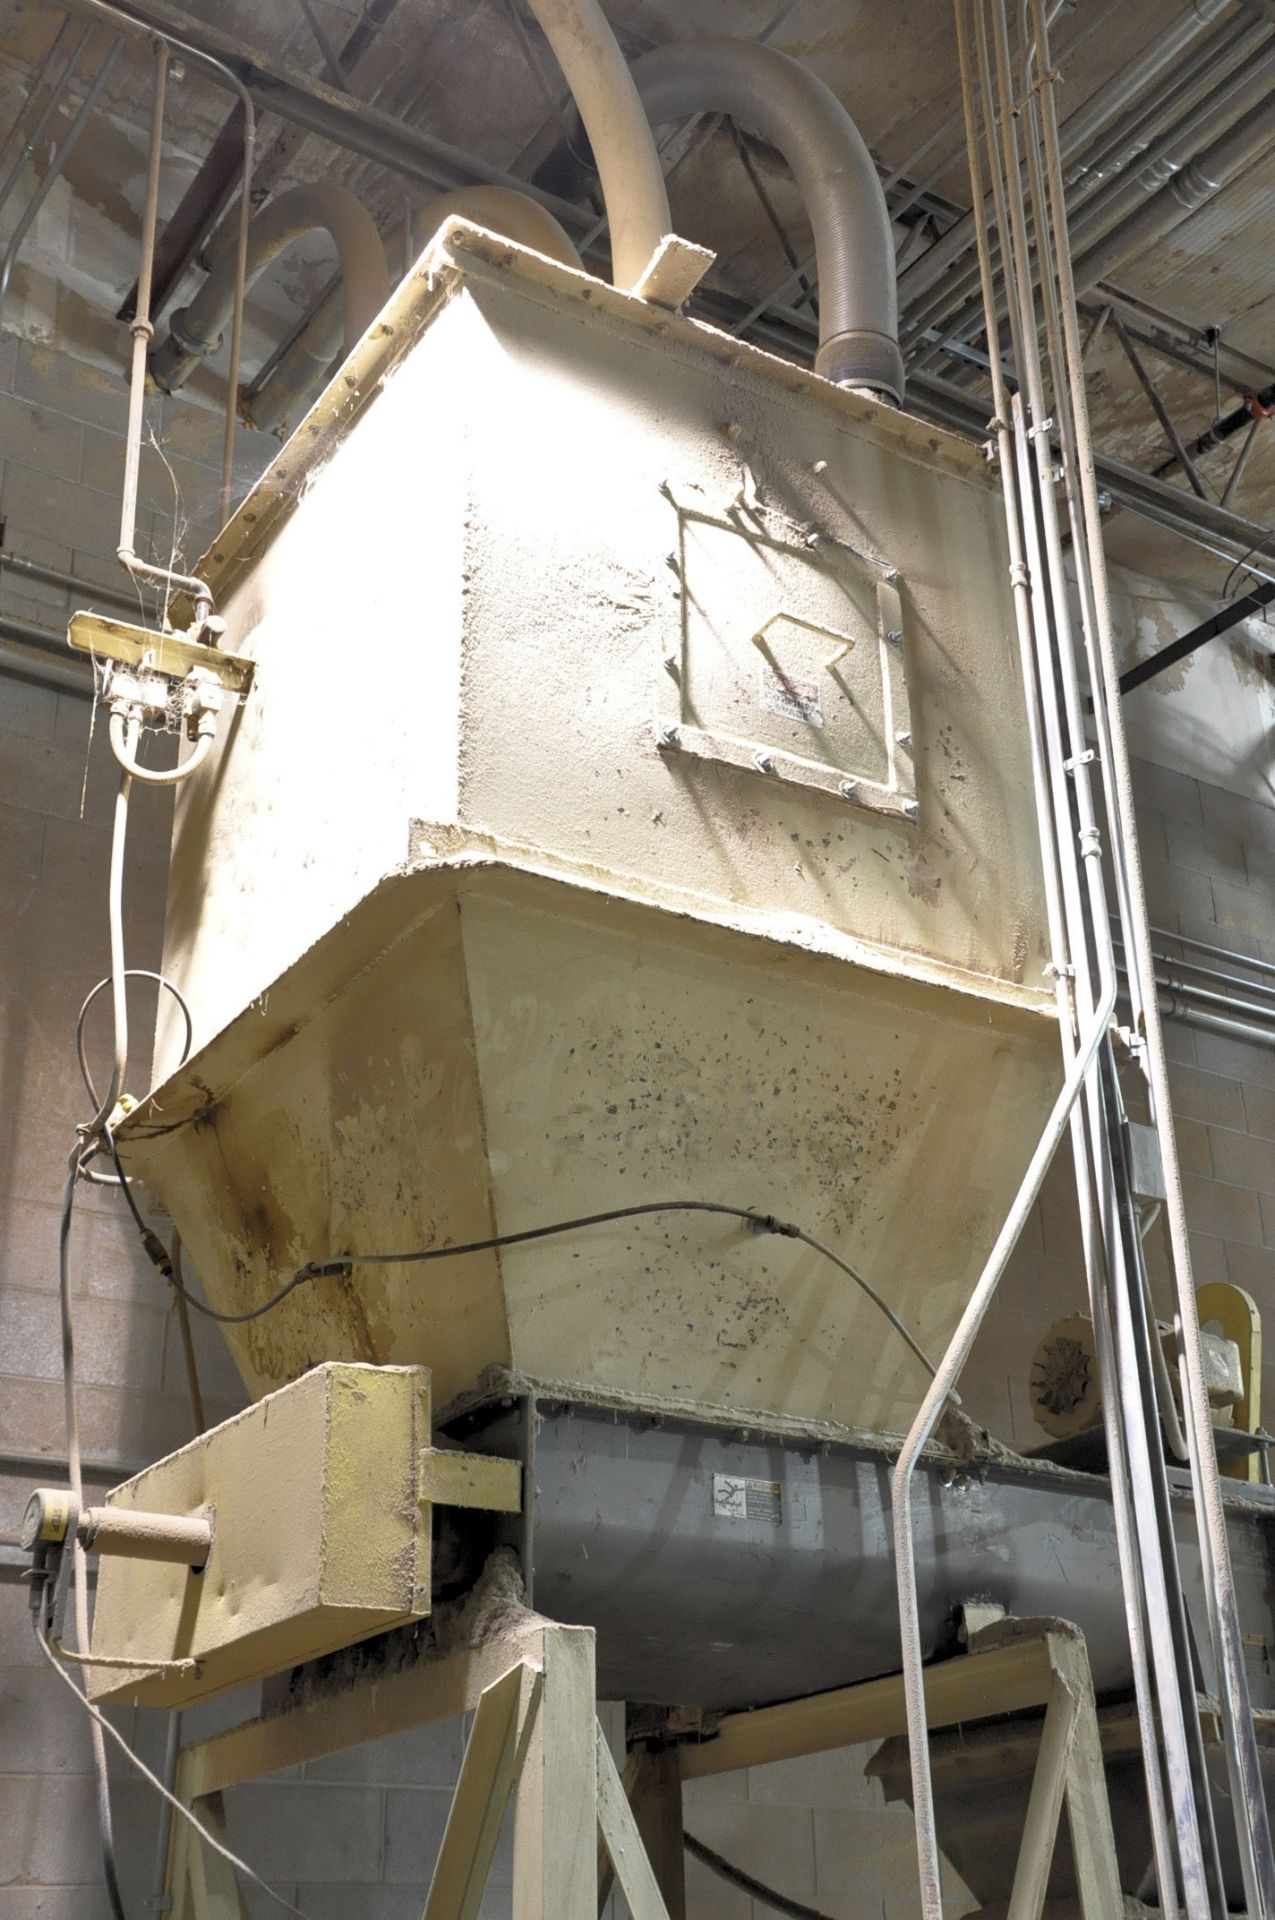 Feeder Bin with KSW 3-Screw Outfeed Aggregates Conveyor System - Image 4 of 10